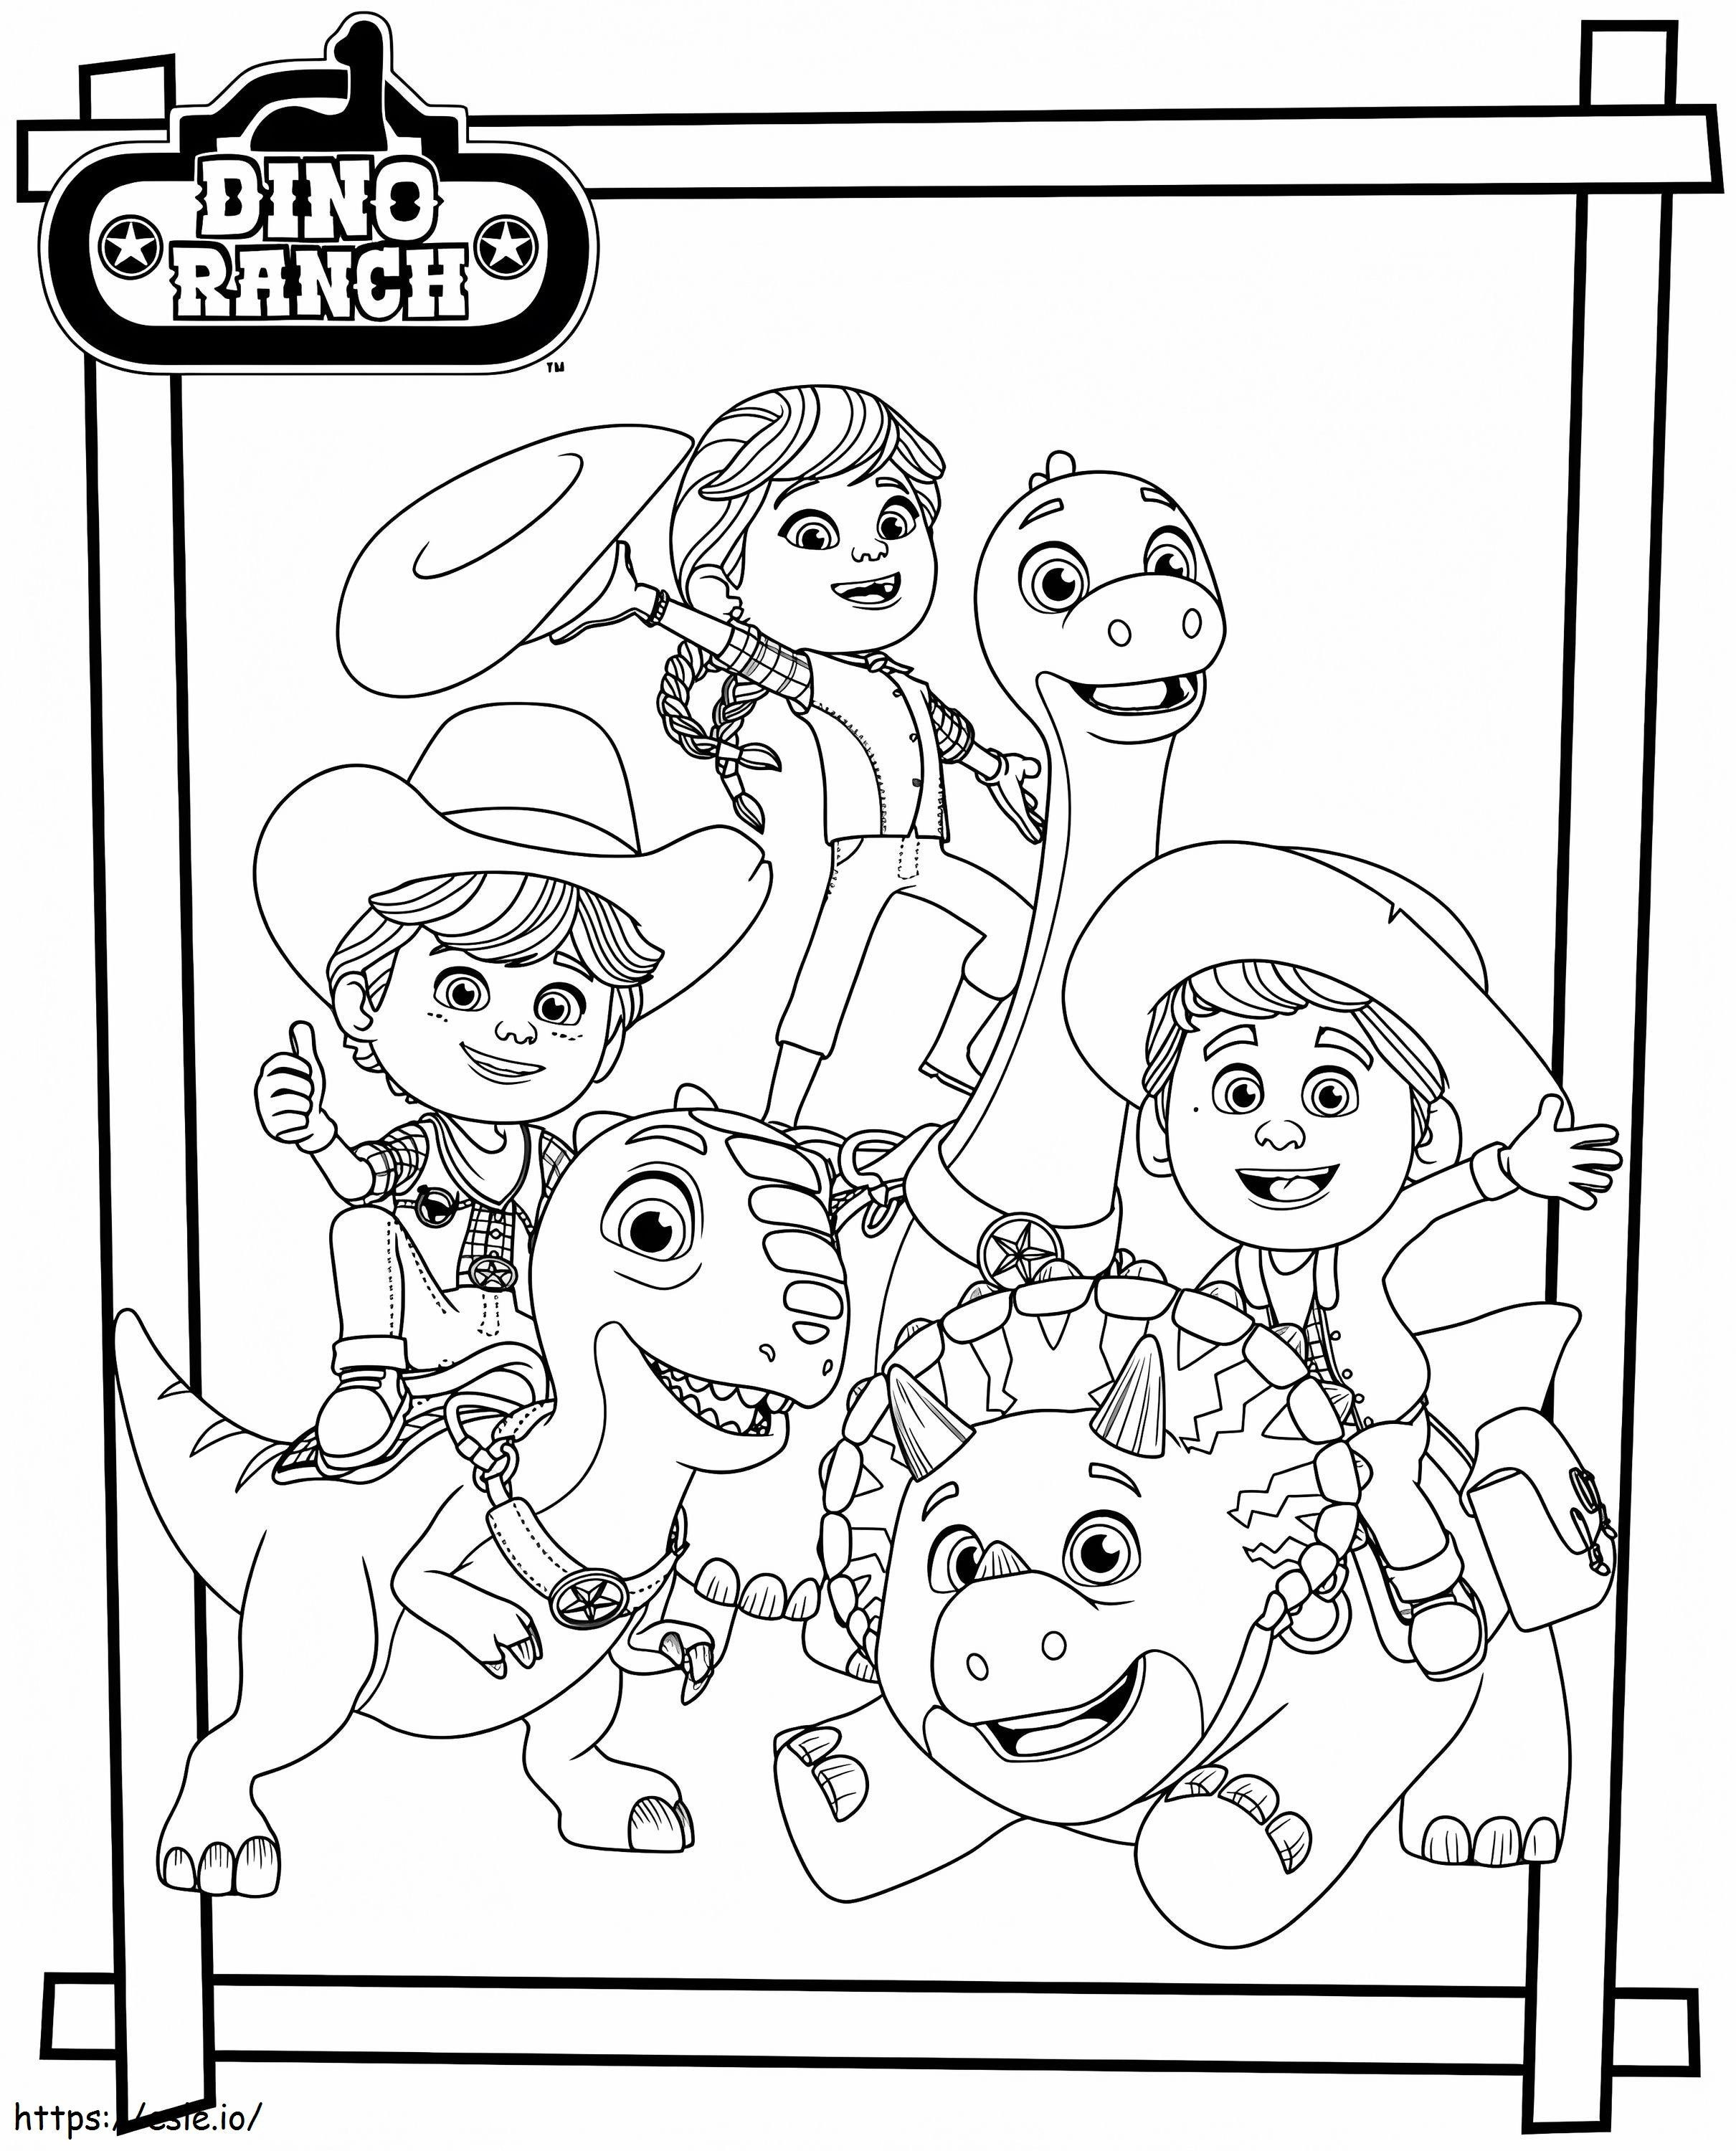 Free Dino Ranch coloring page